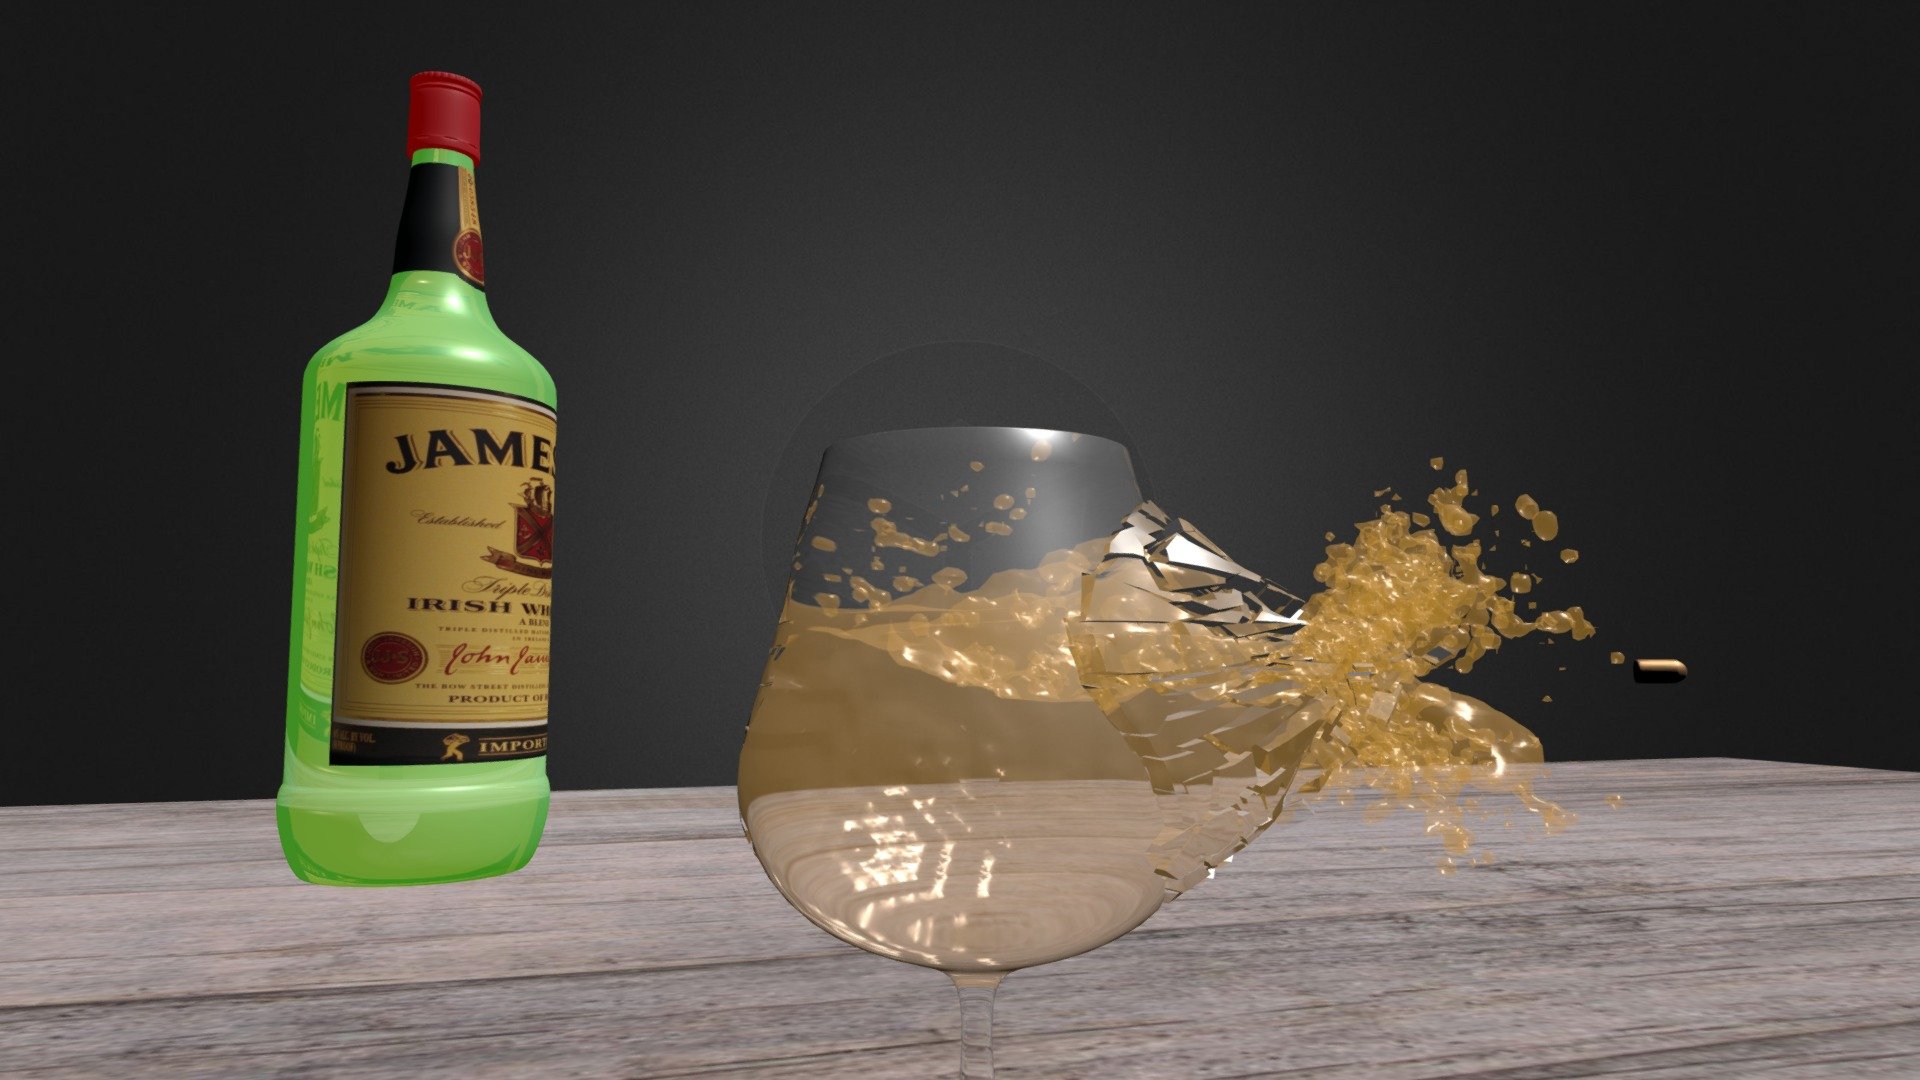 Very old project like irish whiskey :)
That's how final render looks like
http://www.indigorenderer.com/node/691 - Bullet Time - 3D model by Pavel Shabanov (@coolerinc) 3d model